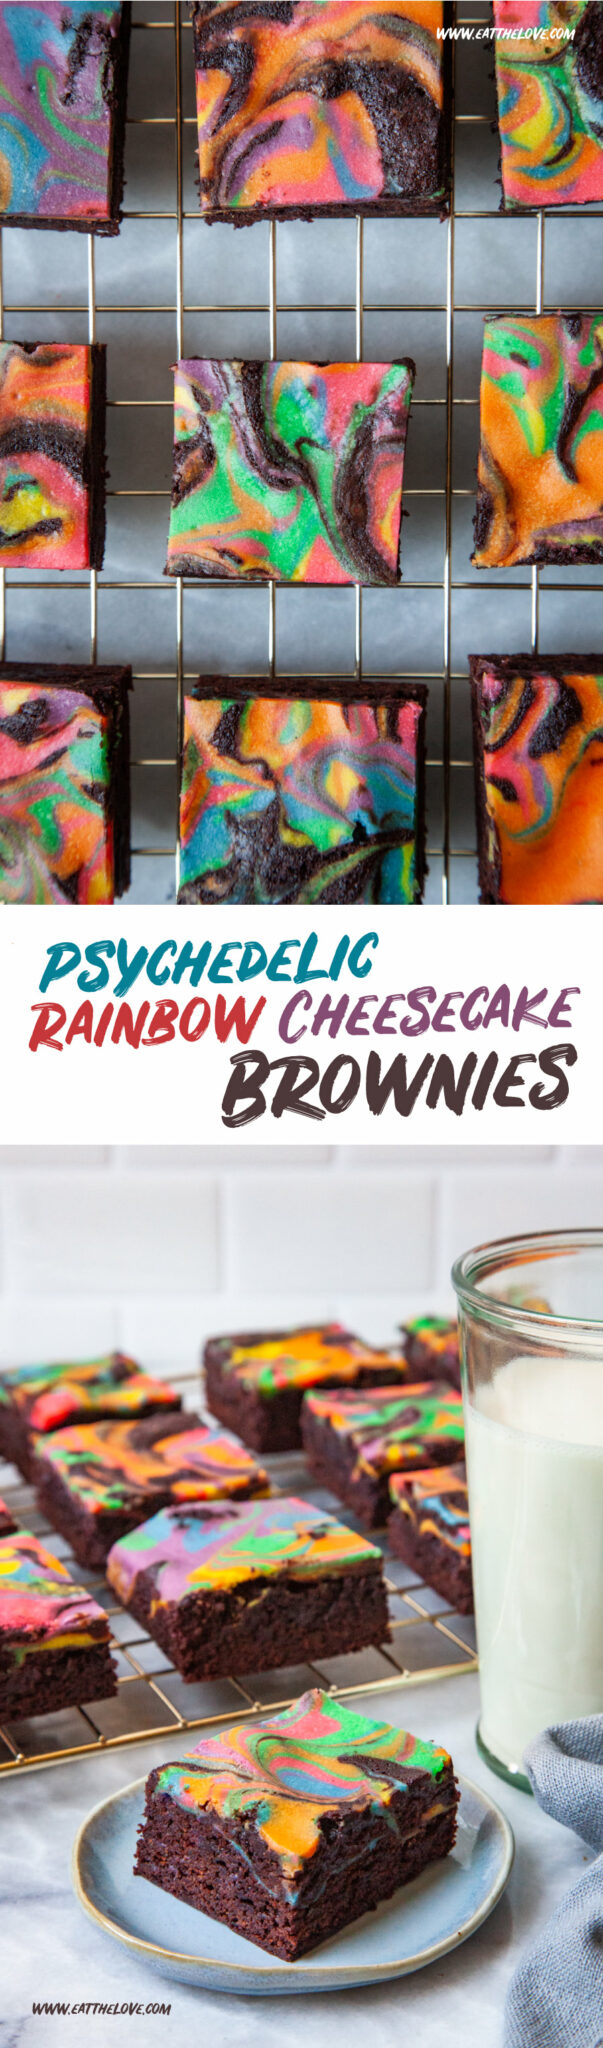 Top image is Rainbow cheesecake brownies sitting on a wire cooling rack. Bottom image is a single rainbow brownie on a small blue plate, with a glass of milk next to it. Behind the plate is a wire cooling rack of more rainbow cheesecake brownies.